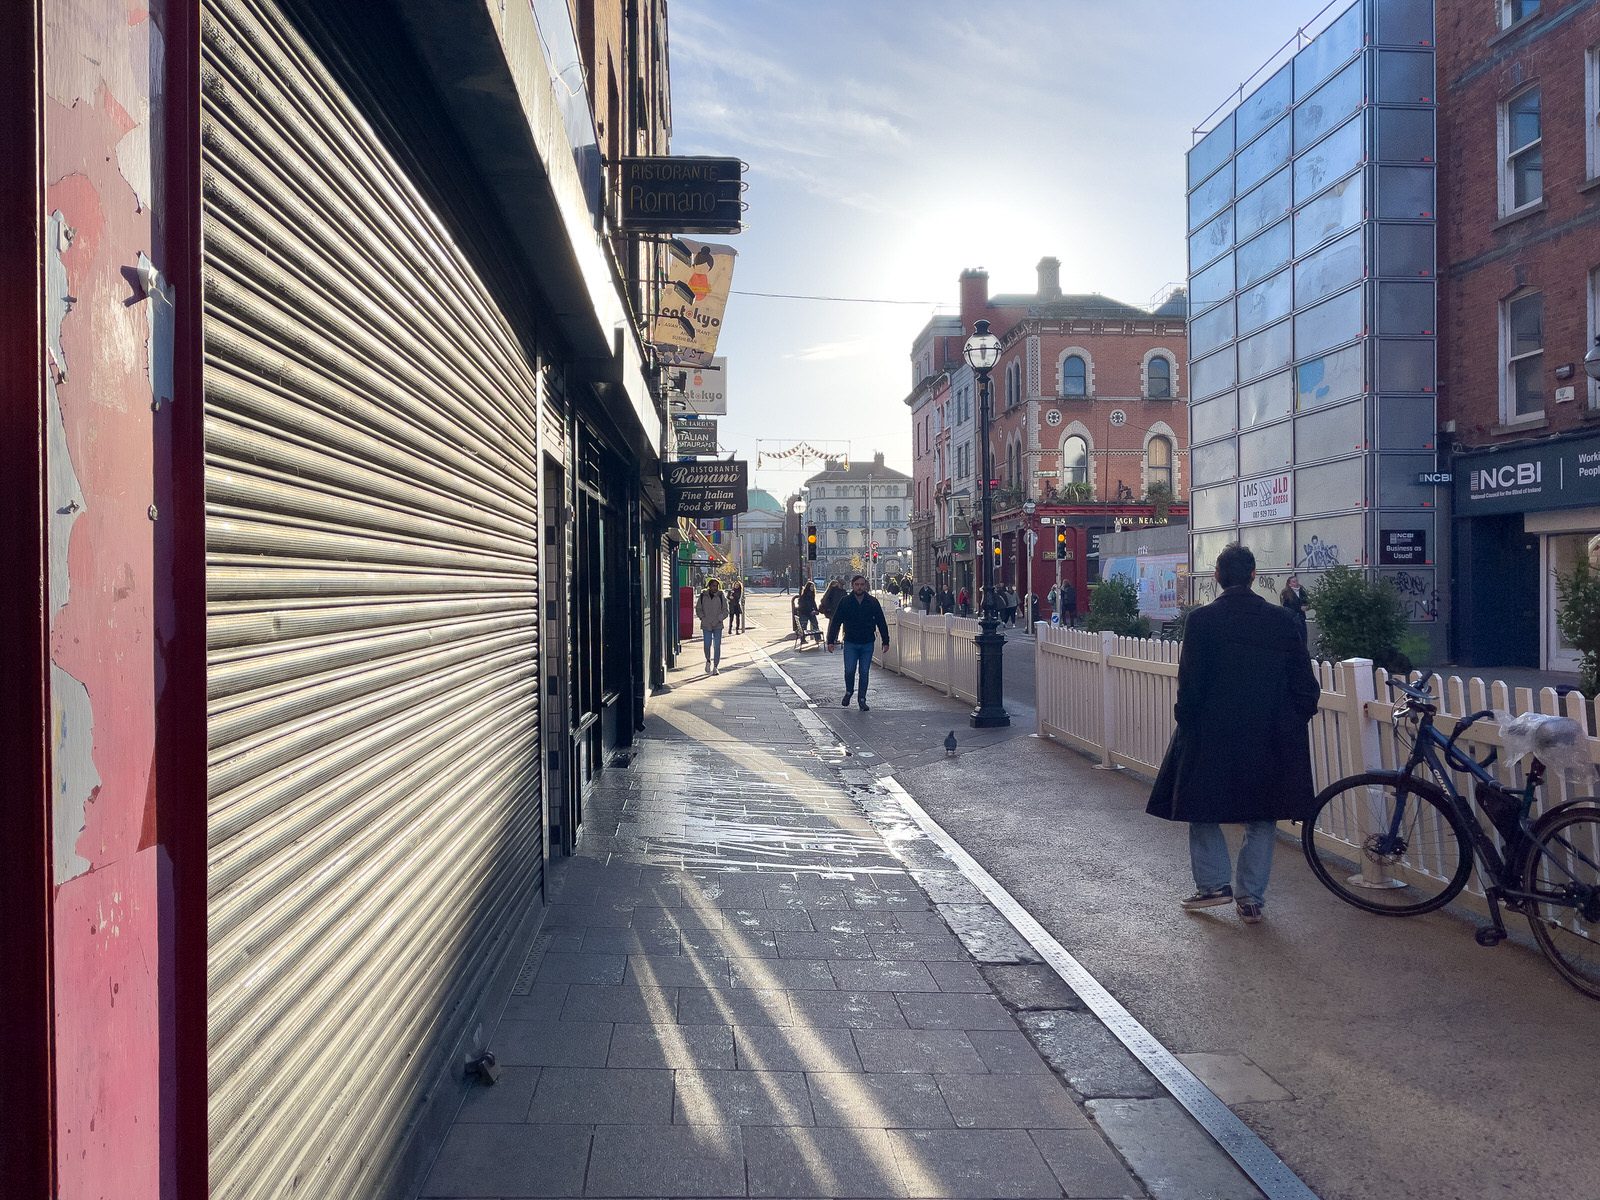 THE NEW STREET FURNITURE AND THE CHRISTMAS TREE [HAVE ARRIVED IN CAPEL STREET]-225873-1